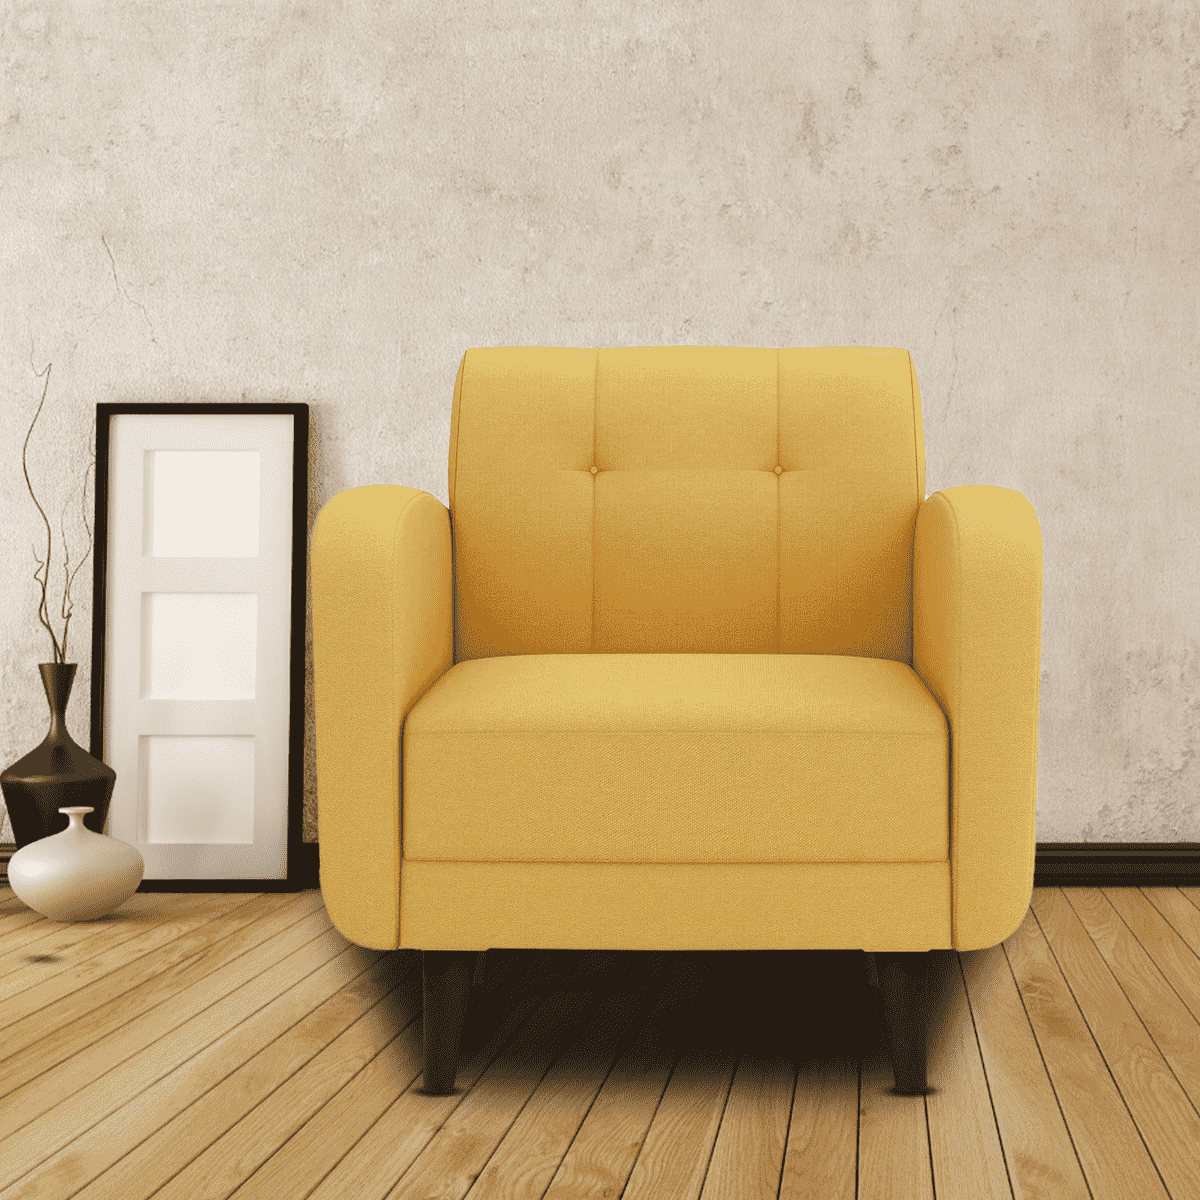 Emor 1 Seater Sofa in Yellow Colour by FernIndia.com